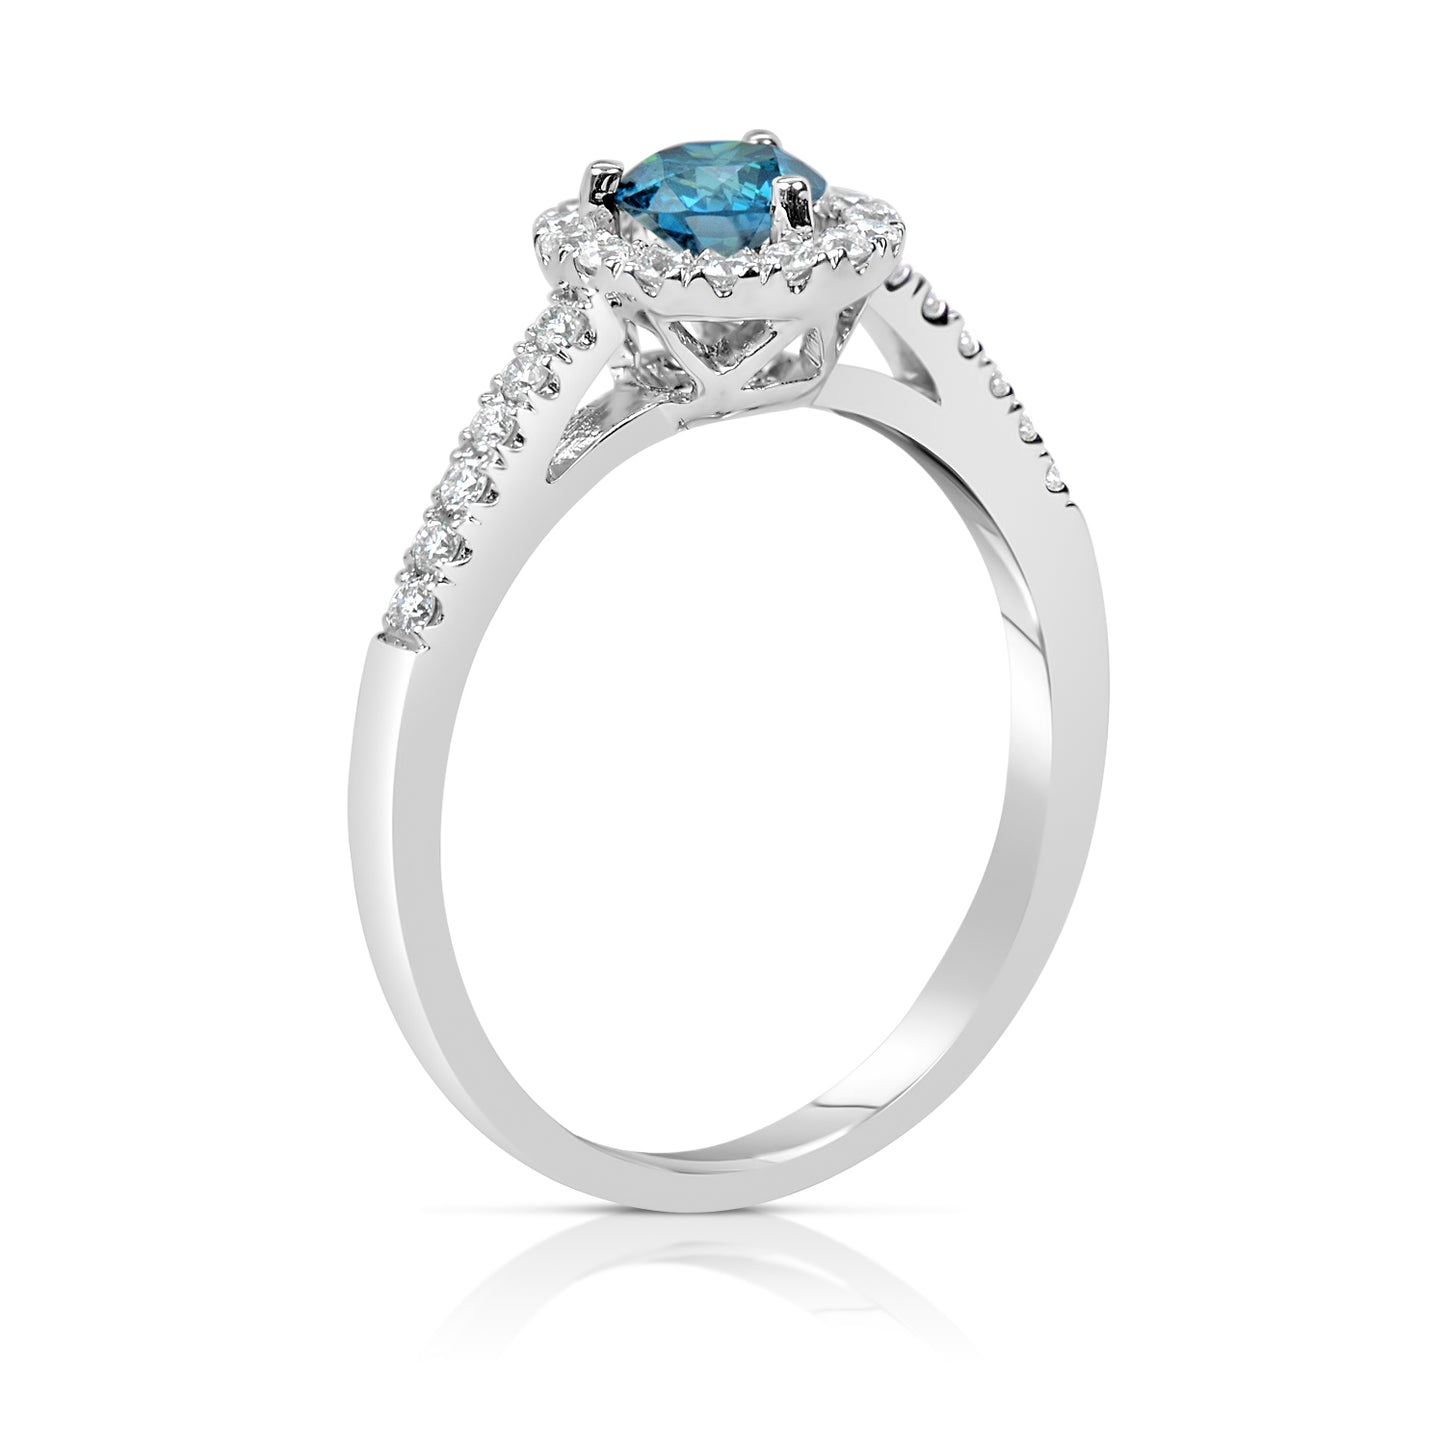 Suzy Levian 14k Gold & White and Blue Diamond Engagement Ring